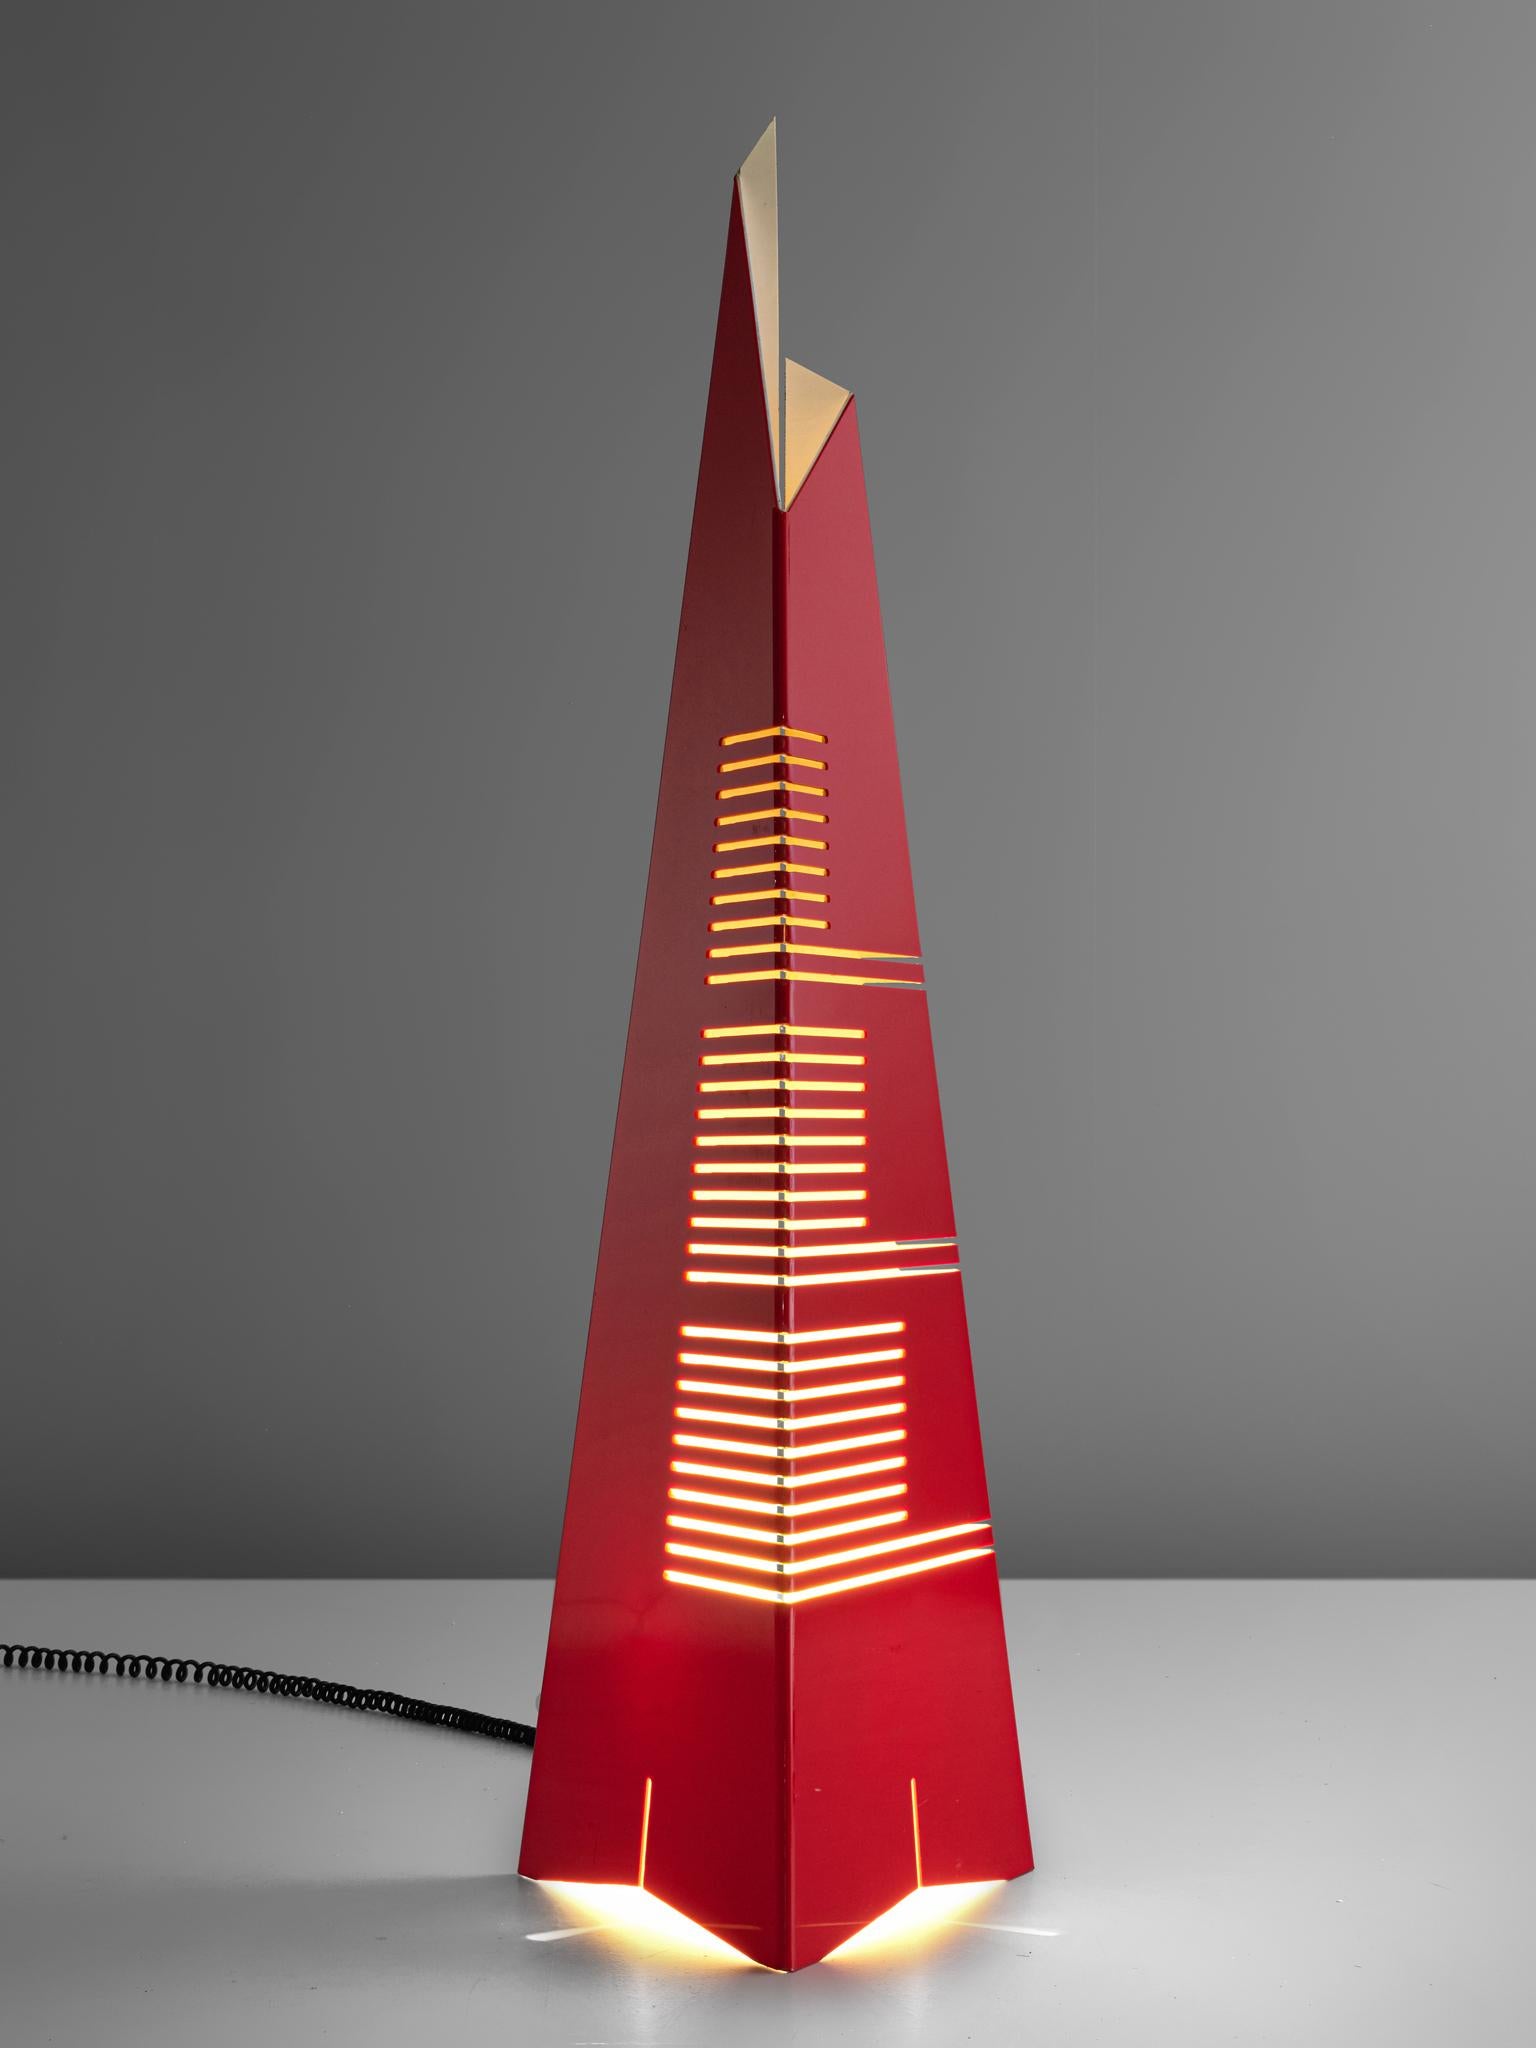 Enrico Tronconi, 'Il Personaggi' floor lamp, acrylic, Italy, 1972

This Post Modern floor lamp by Enrico Tronconi reminds of a futuristic skyscraper. The pyramid shaped lamp consists of one acryclic sheet that is folded at several places, which